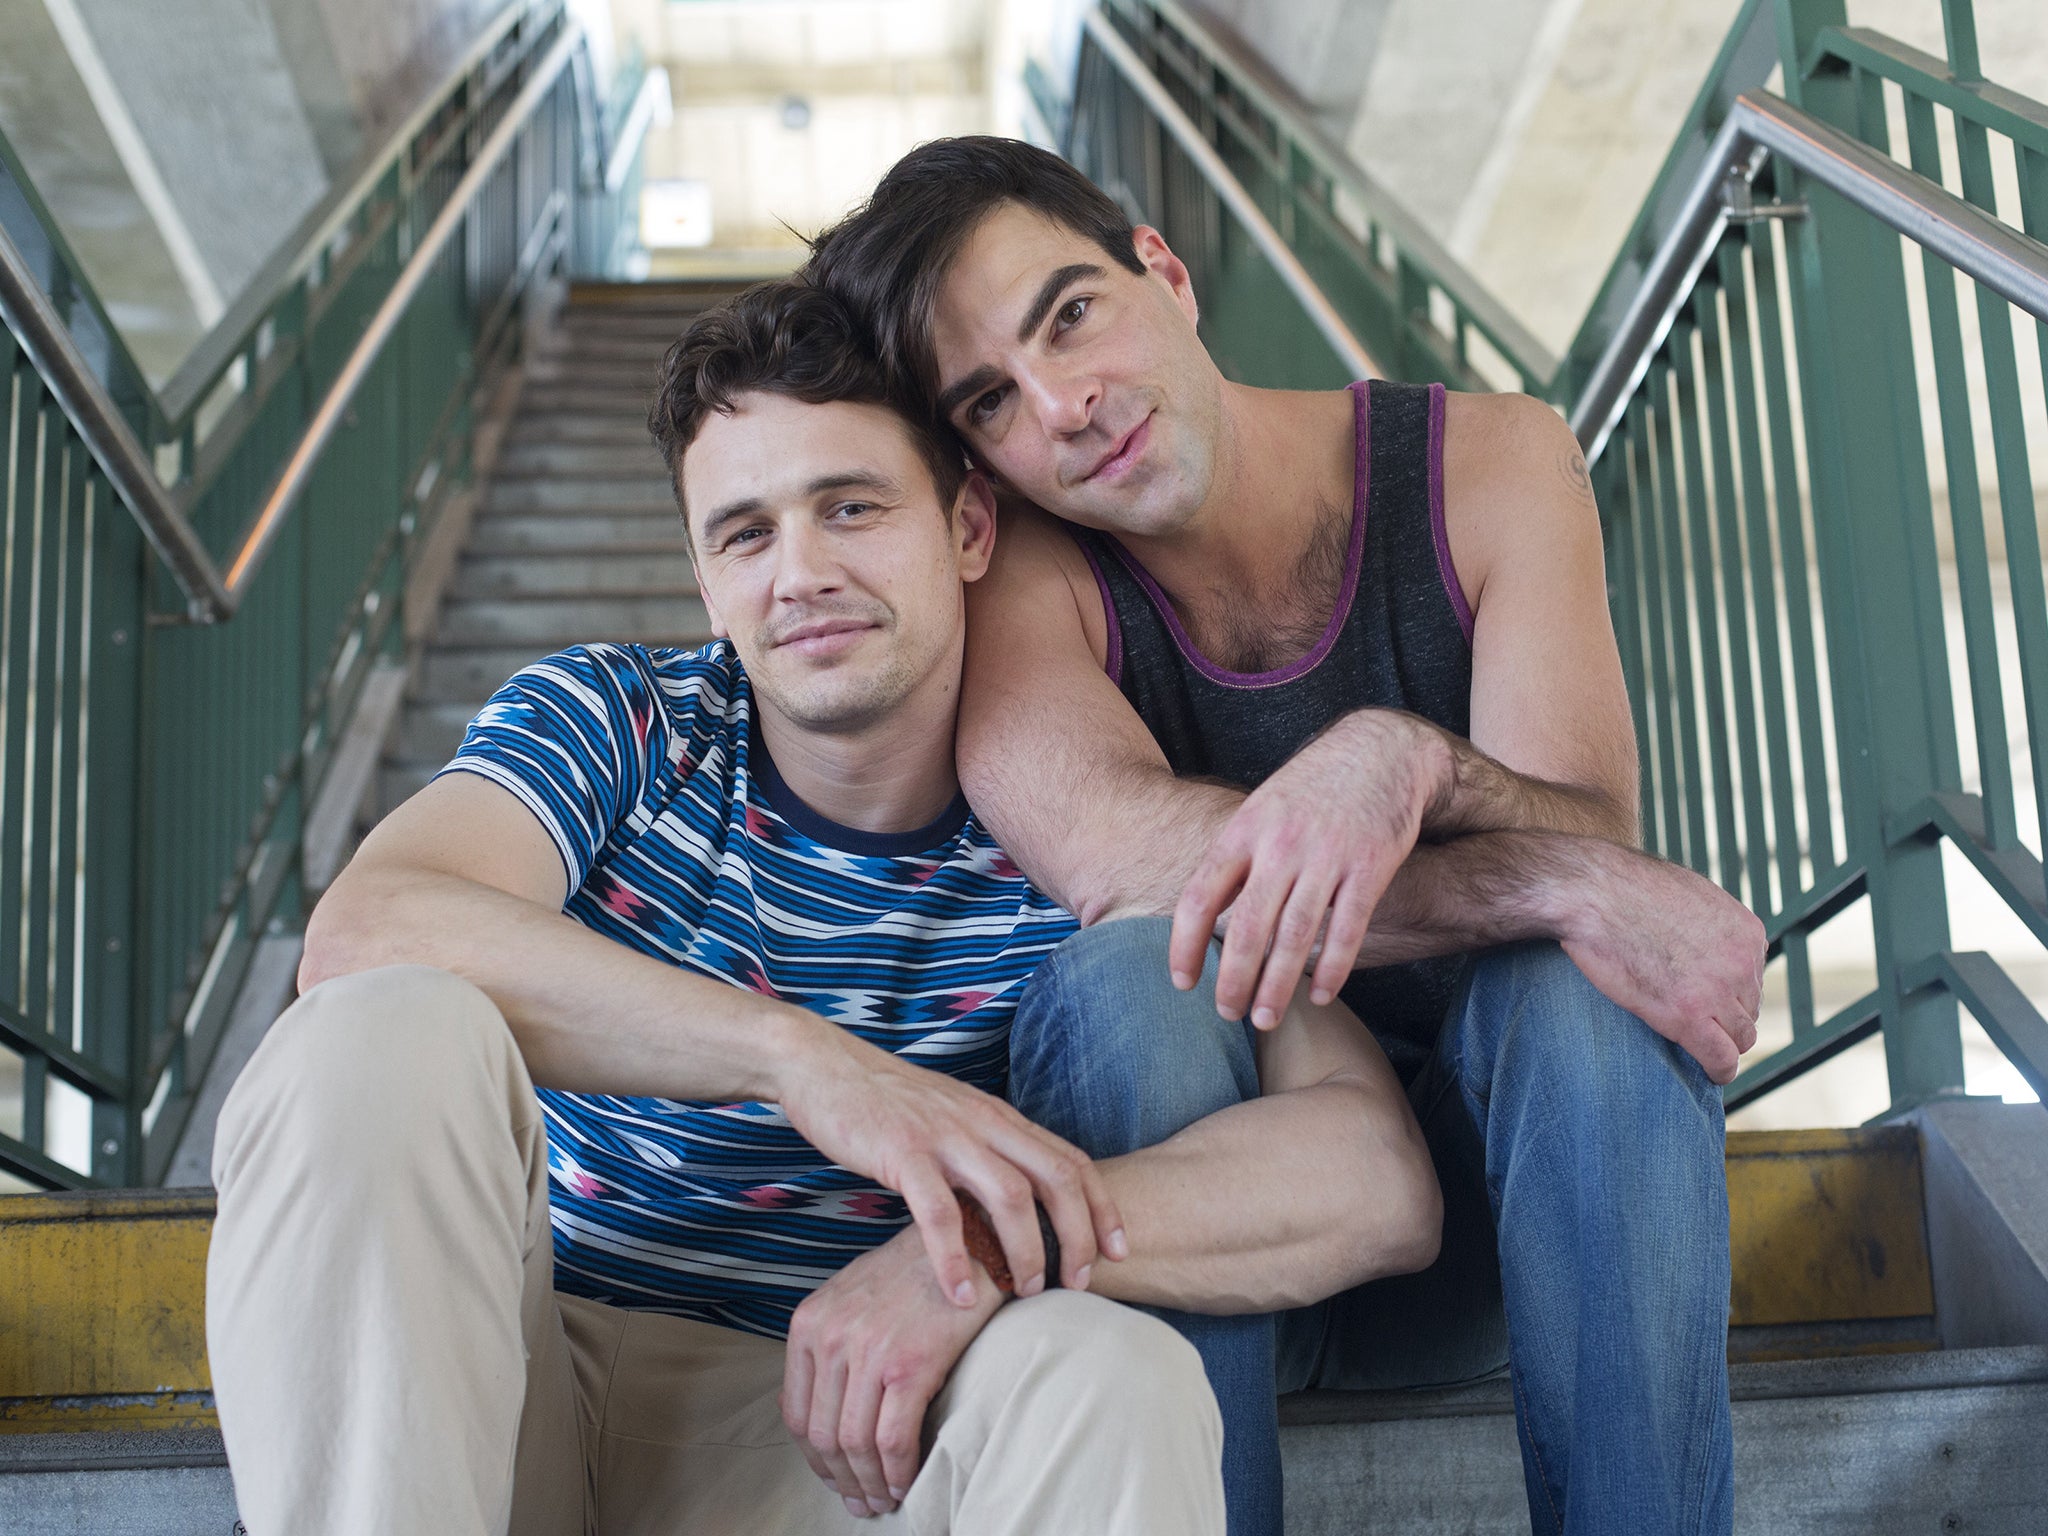 Justin Kelly interview On James Franco playing a gay man who renounces his homosexuality The Independent The Independent pic